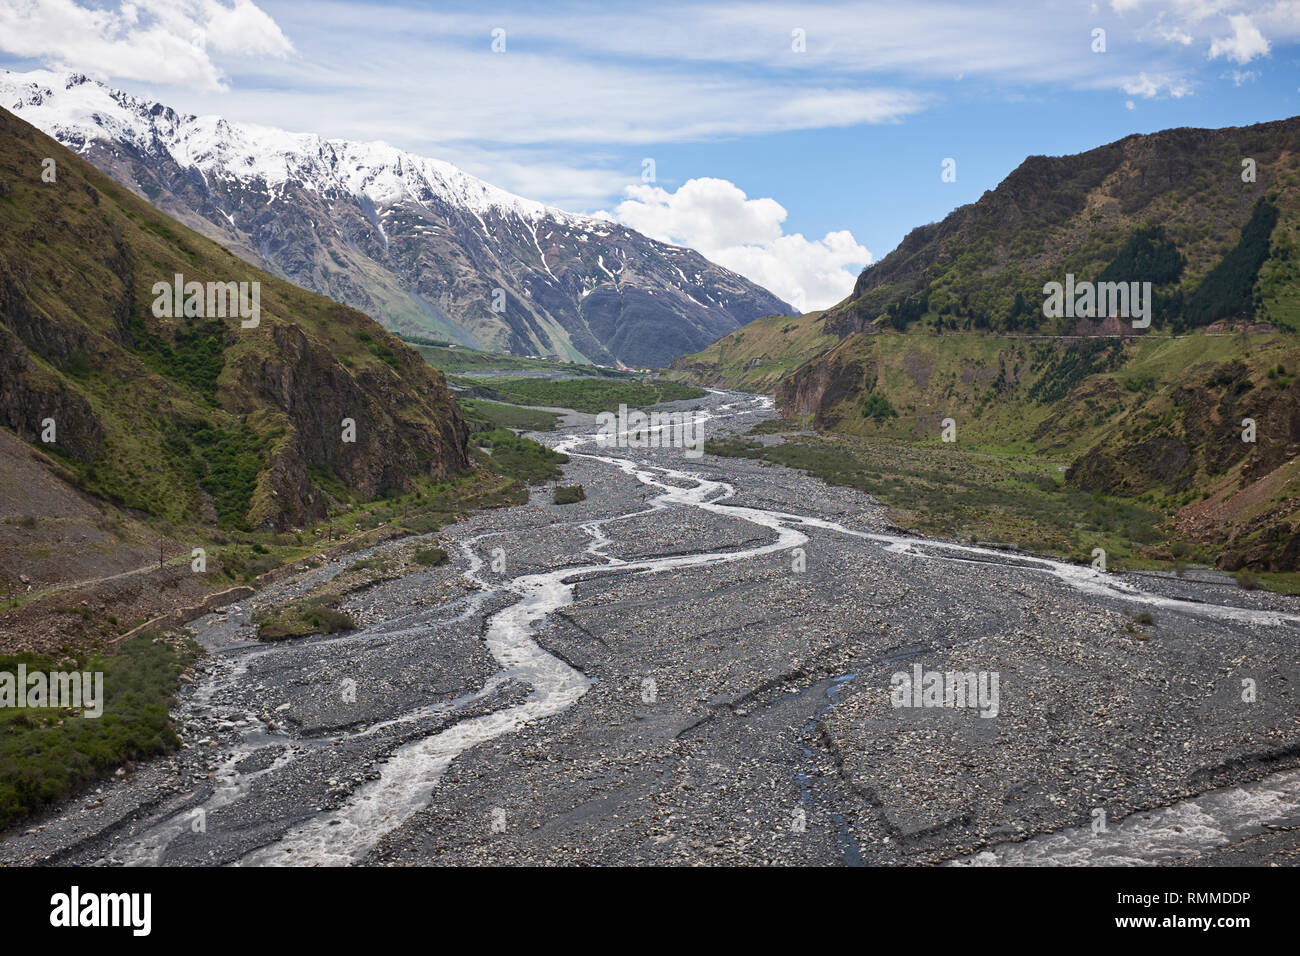 Landscape of a valley of a mountain valley, mountains background mountain river, Georgia, Caucasus Stock Photo